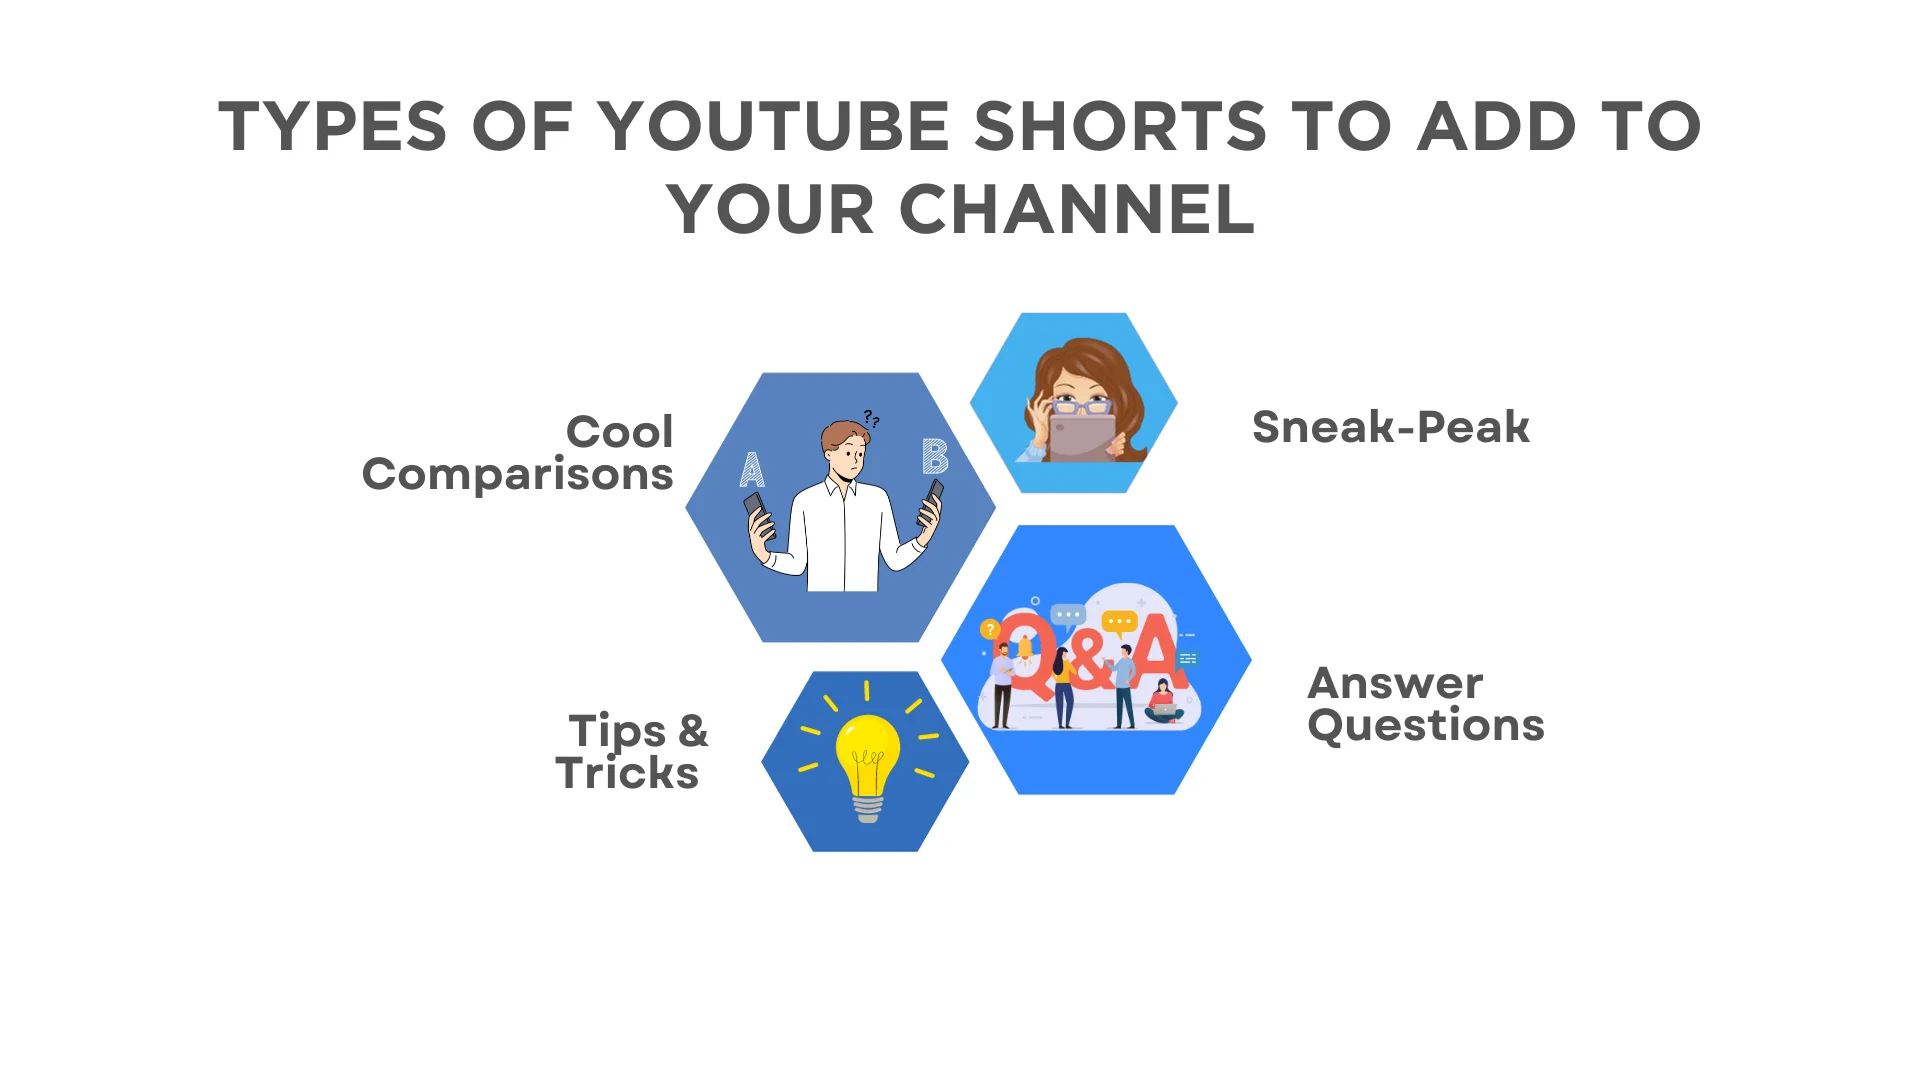 A list of the types of youtube shorts to add to your channel